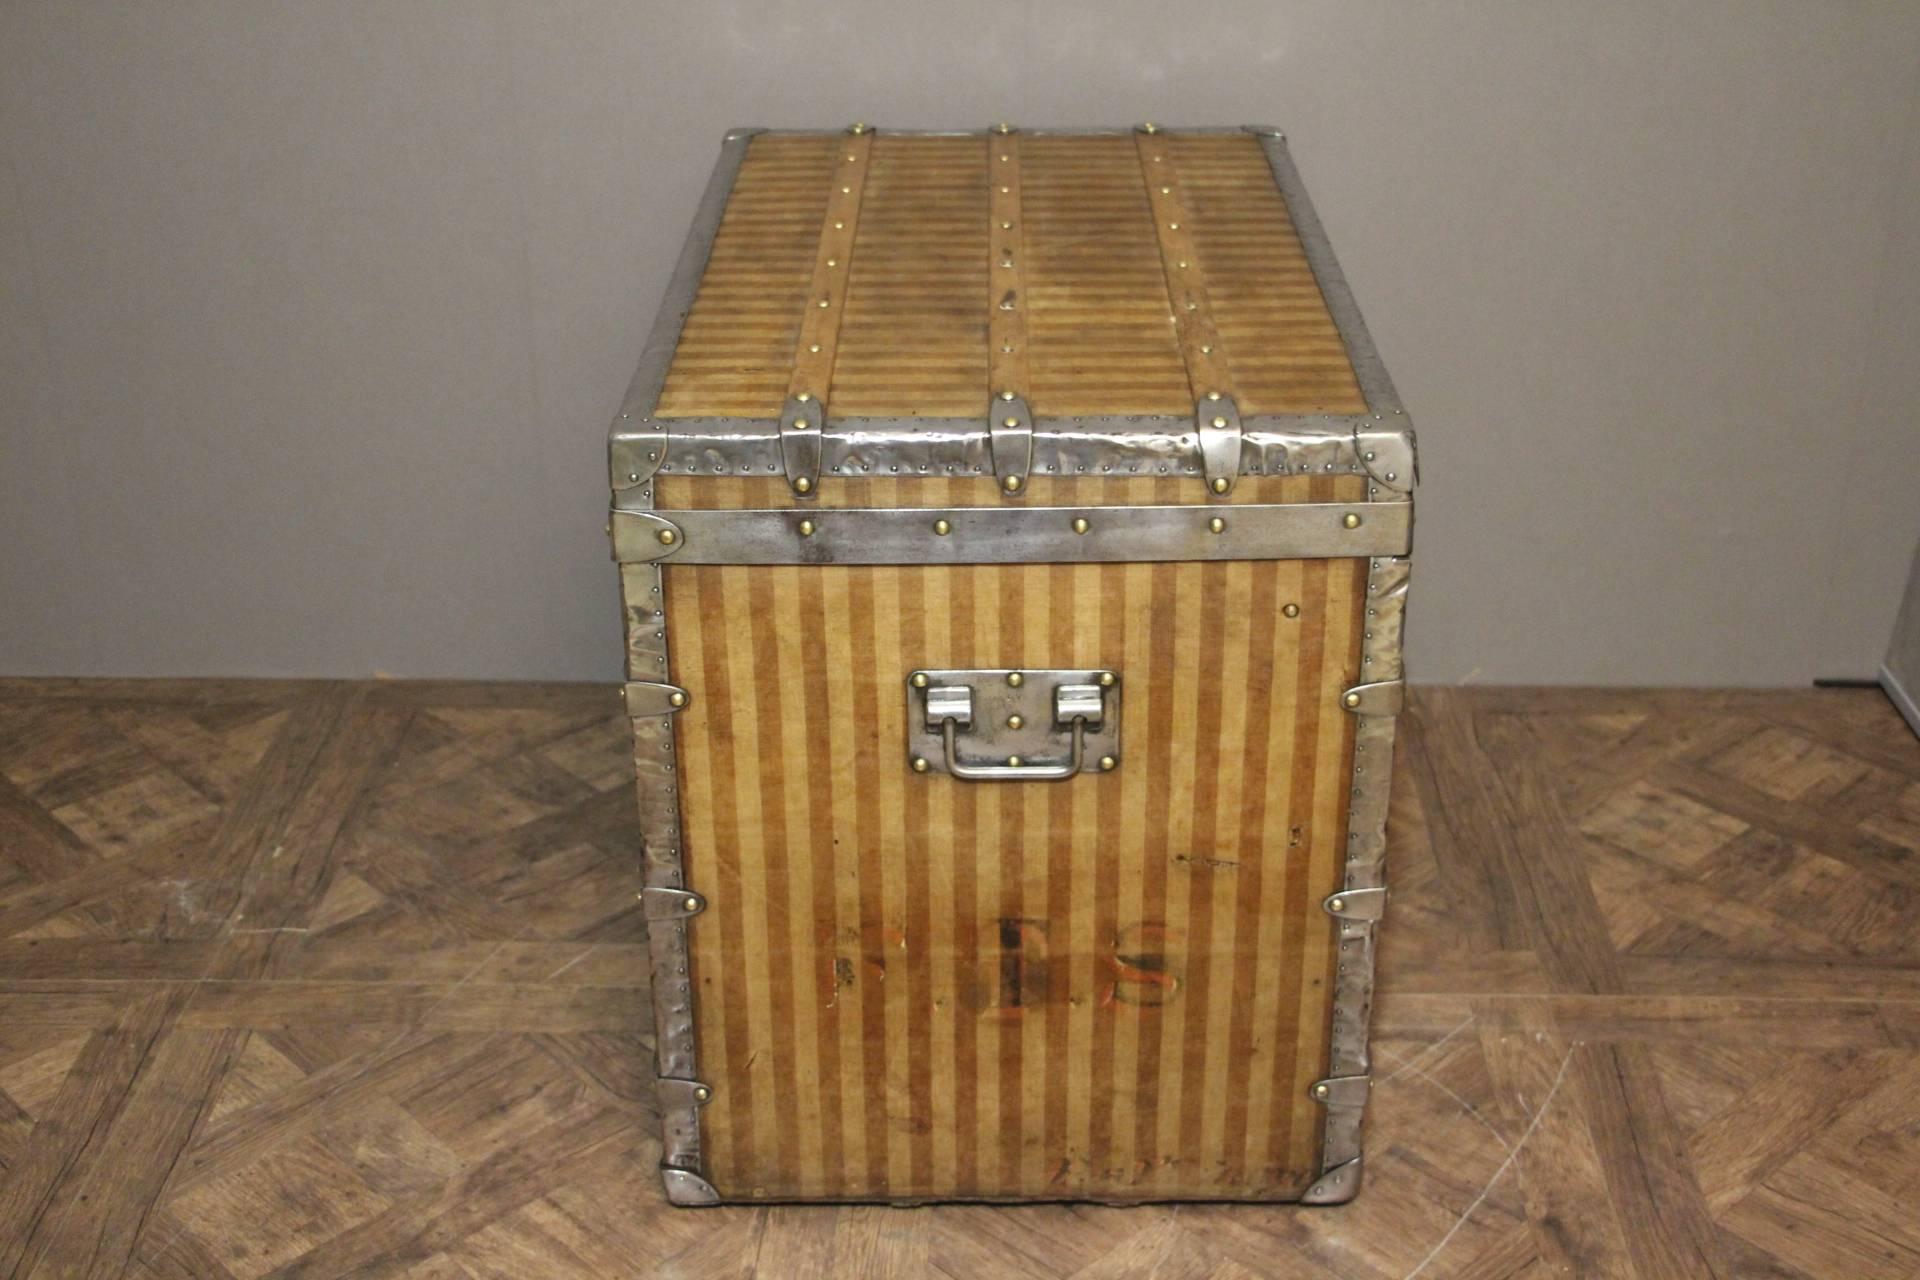 This antique Louis Vuitton steamer trunk features the very rare beige and brown stripped canvas as well as its brass main lock, its two steel latches and LV marked steel side handles.

All its steel pieces have been restored to a wonderful